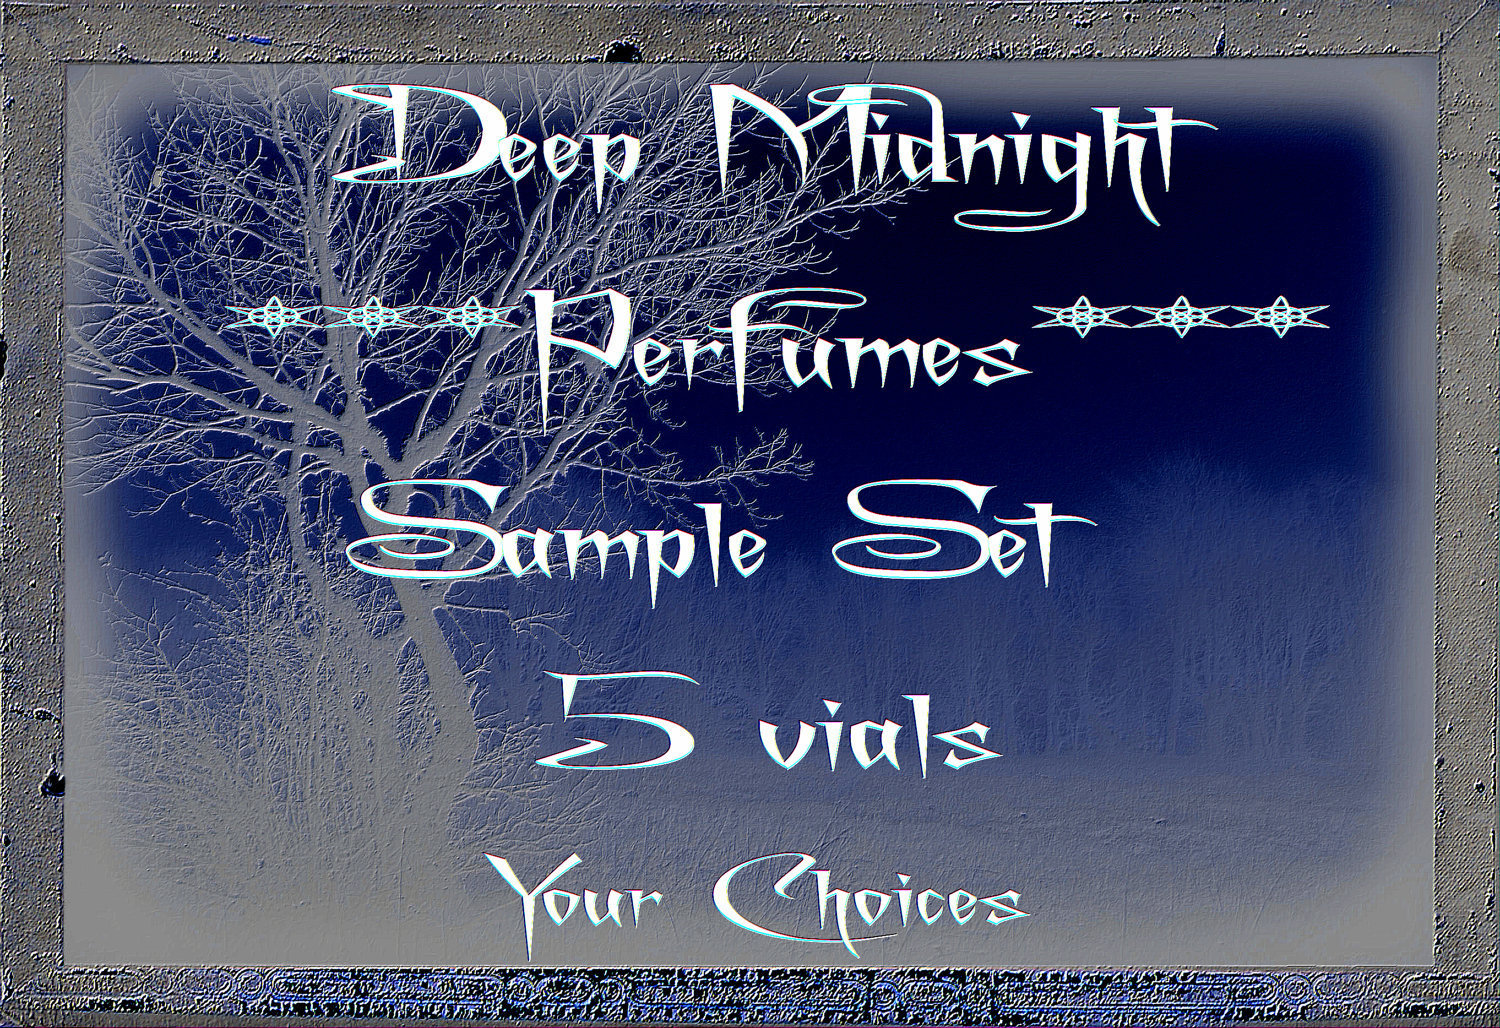 FIVE Artisan Perfume Samples - Your choices of DEEP MIDNIGHT Perfumes™